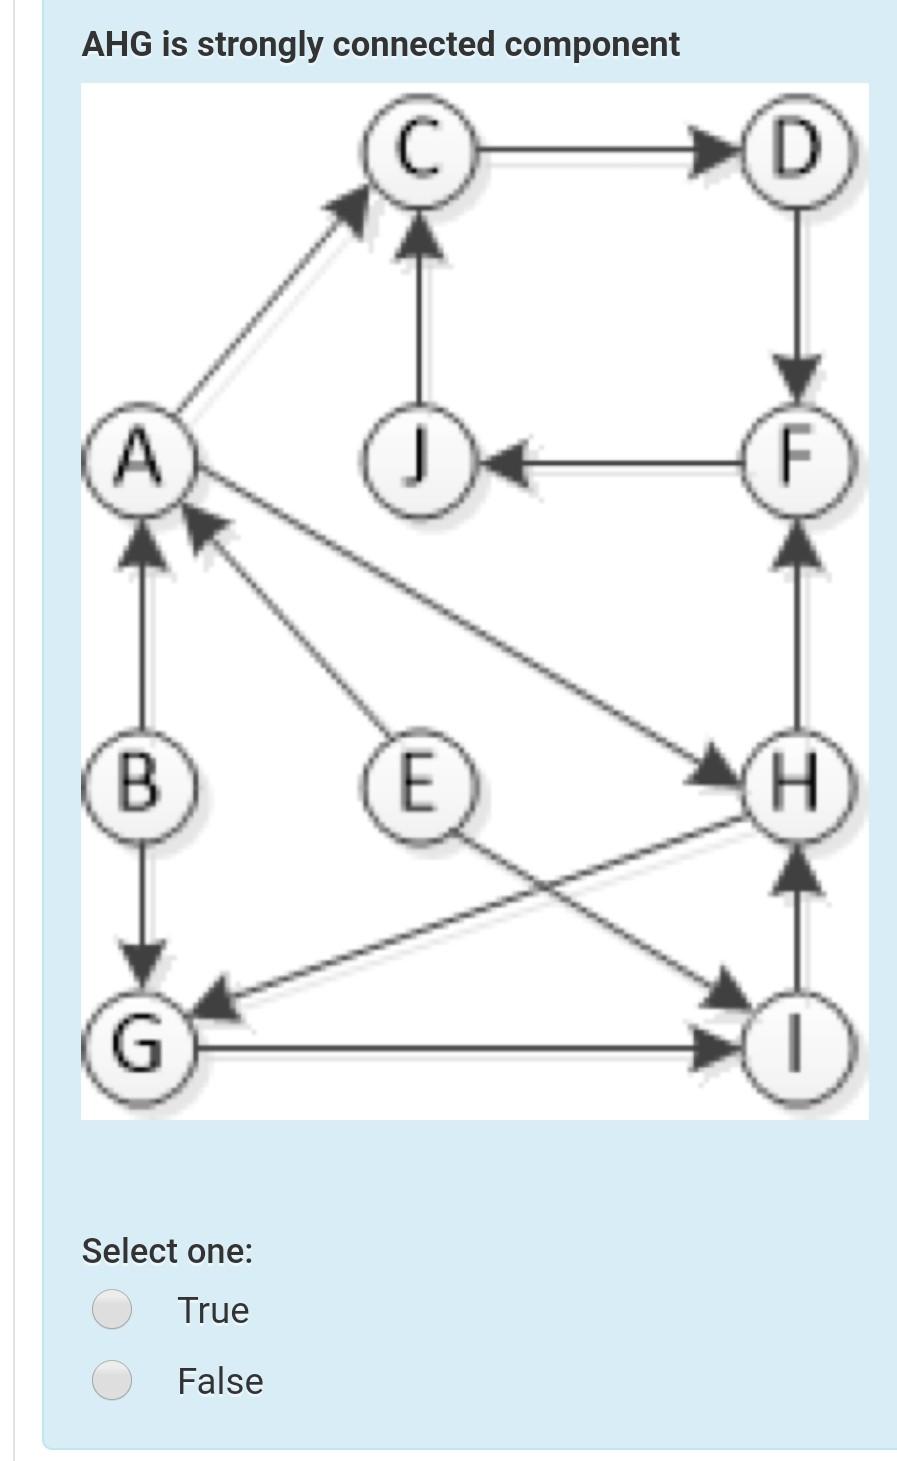 Connected components. Neighbors of a connected graph component.